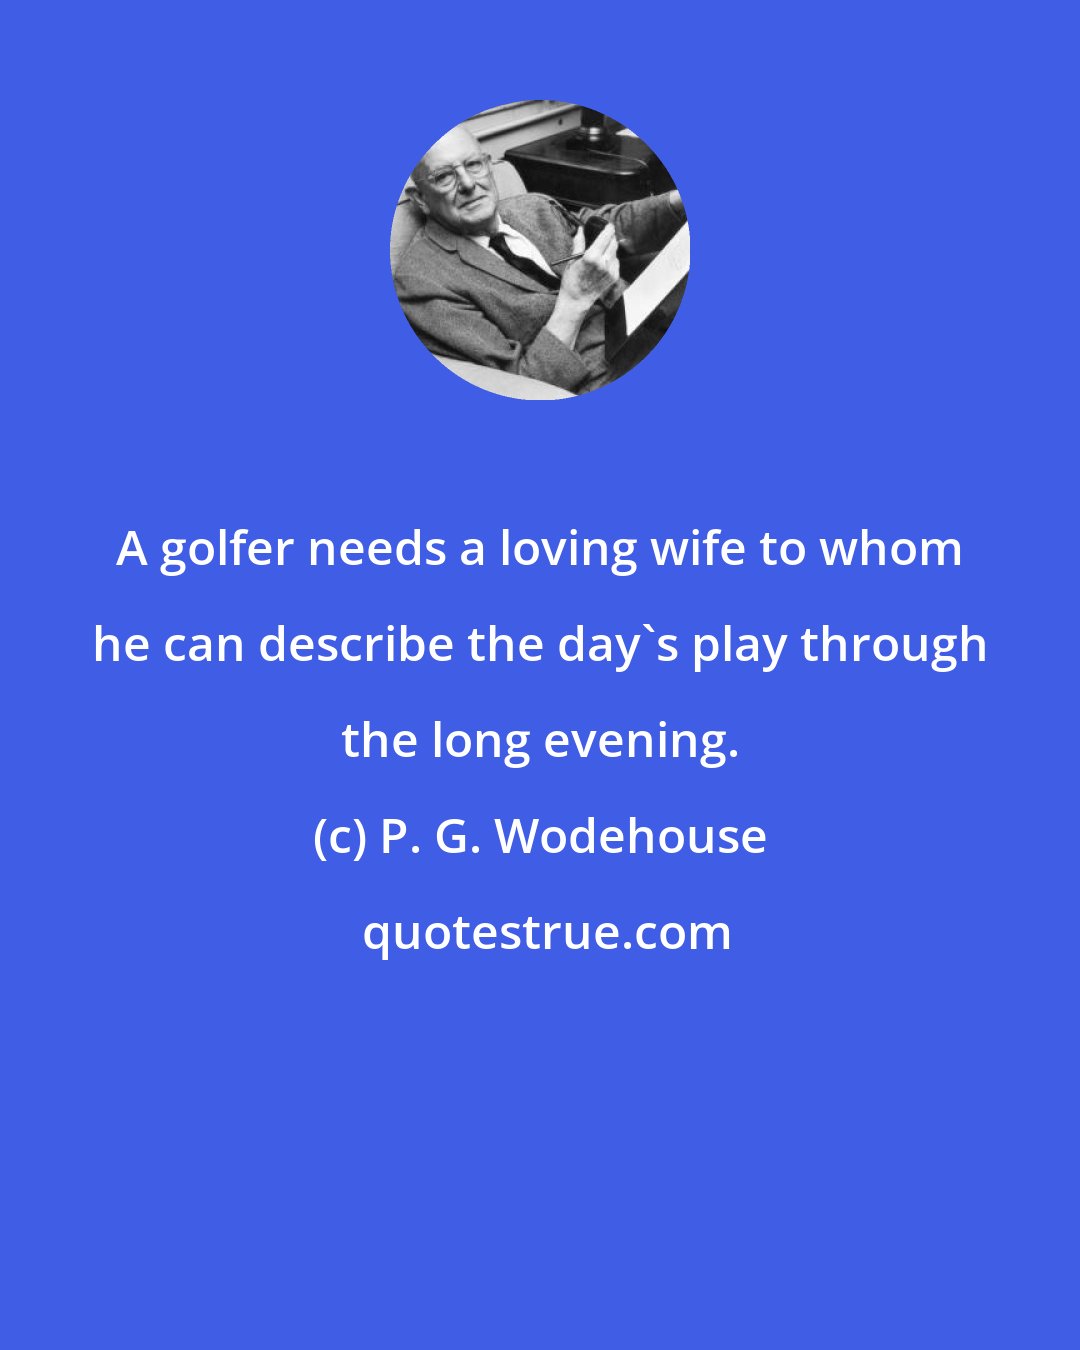 P. G. Wodehouse: A golfer needs a loving wife to whom he can describe the day's play through the long evening.